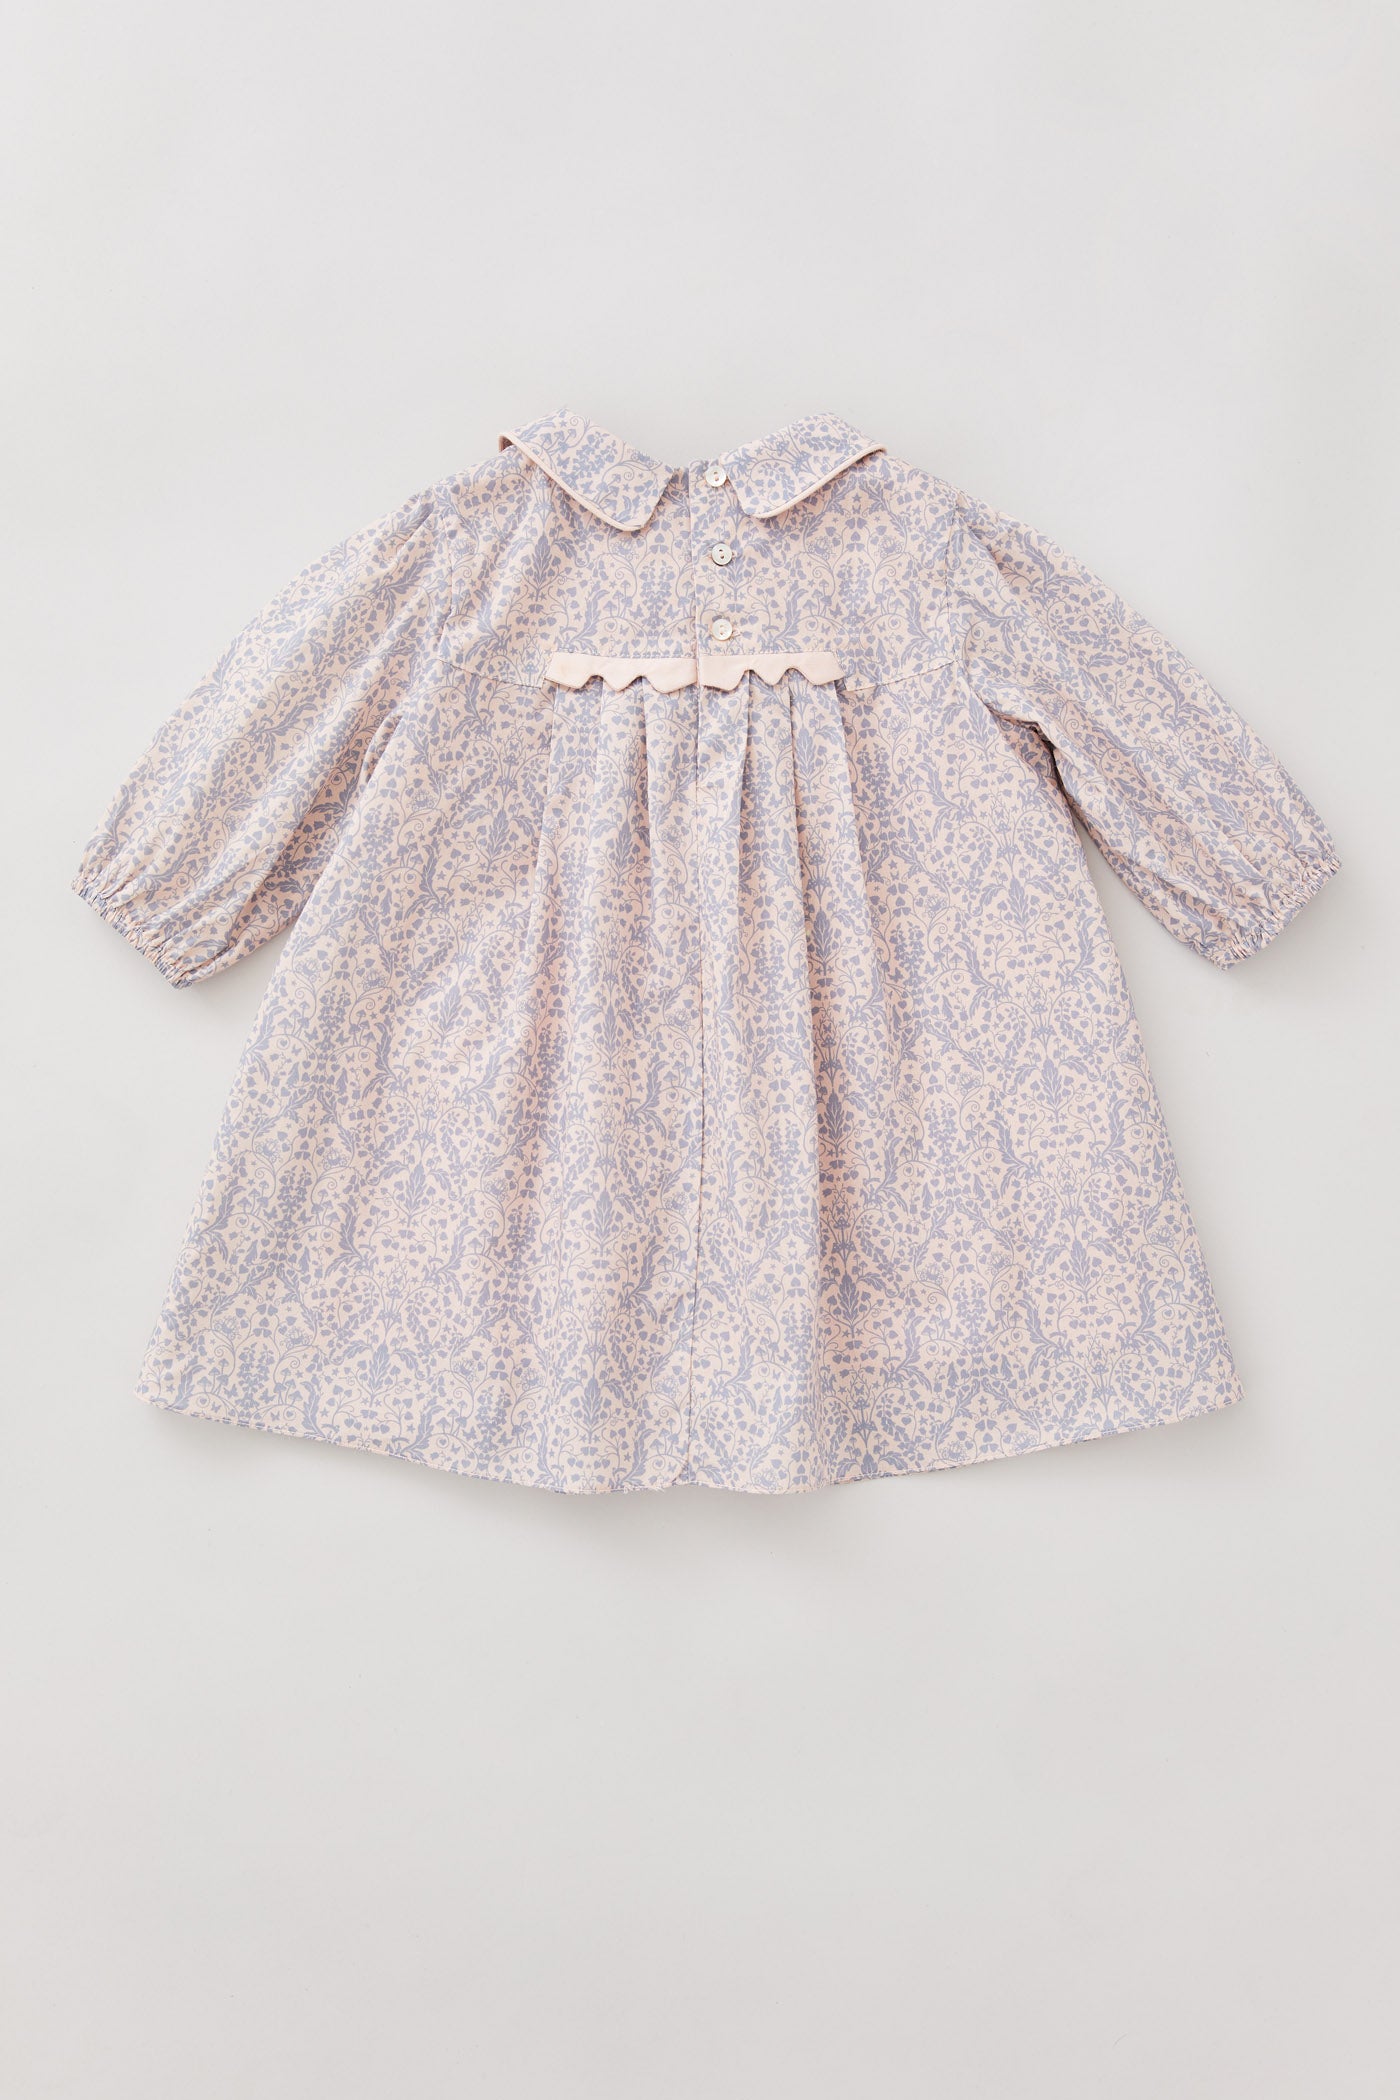 Baby Zigzag Dress in Pink and Lavender Fairy Liberty Print - Designed by Ingrid Lewis - Strawberries & Cream